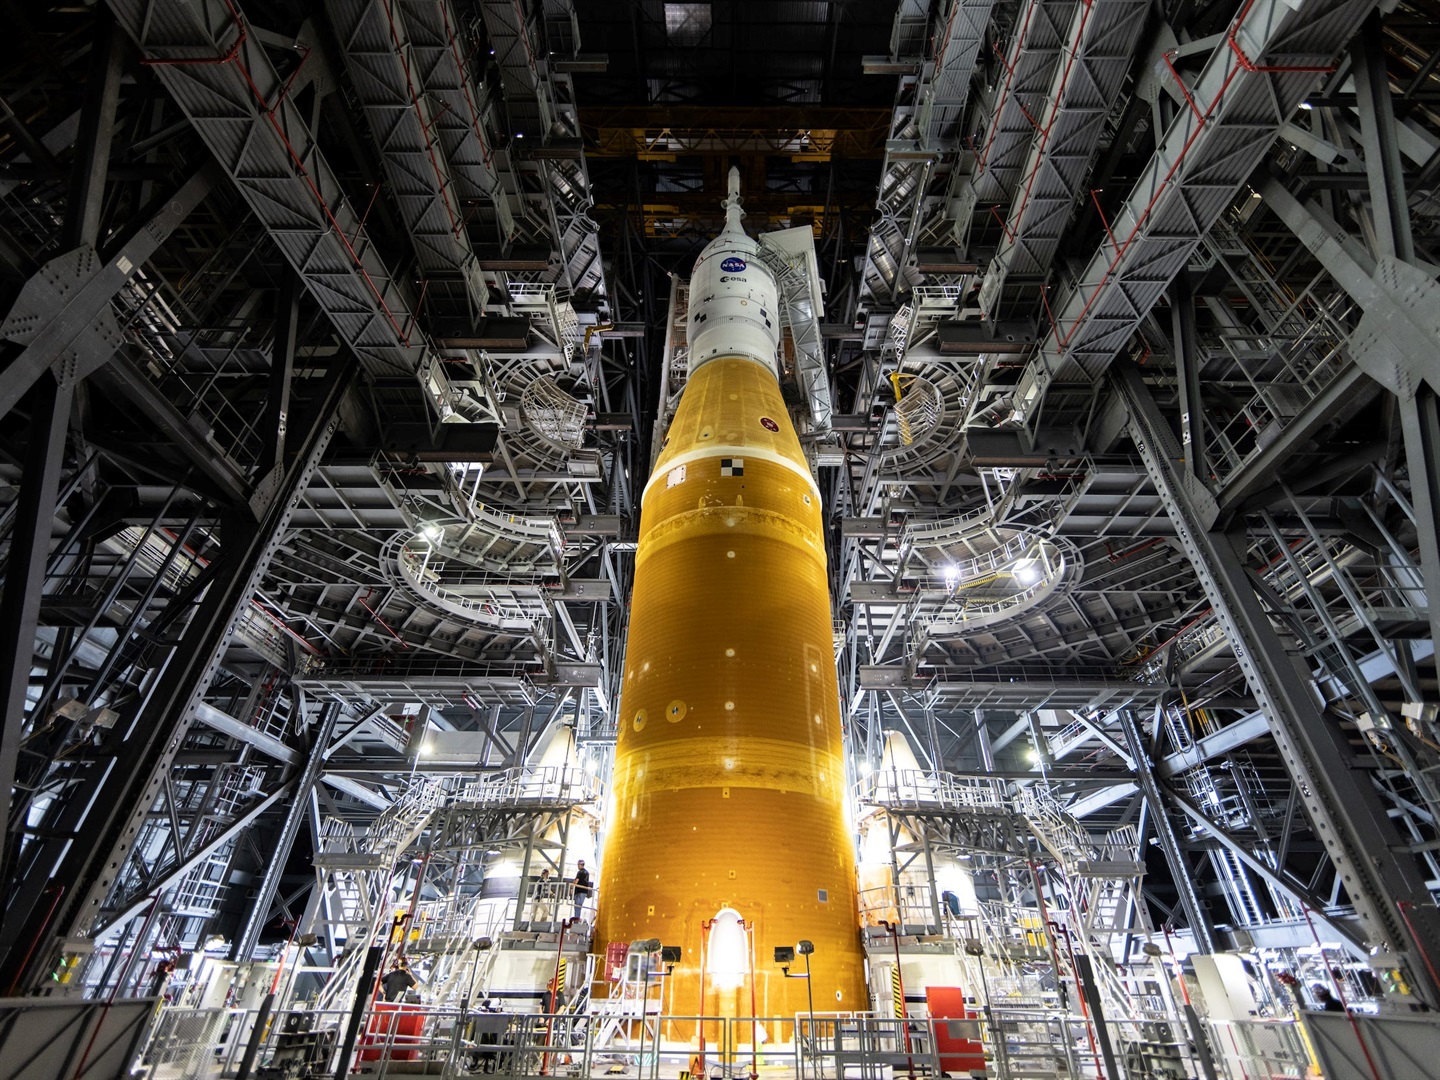 Work platforms are retracted from the Artemis I Space Launch System, inside the Vehicle Assembly Building at NASA's Kennedy Space Center in Florida, on March 11, 2022. NASA/Frank Michaux